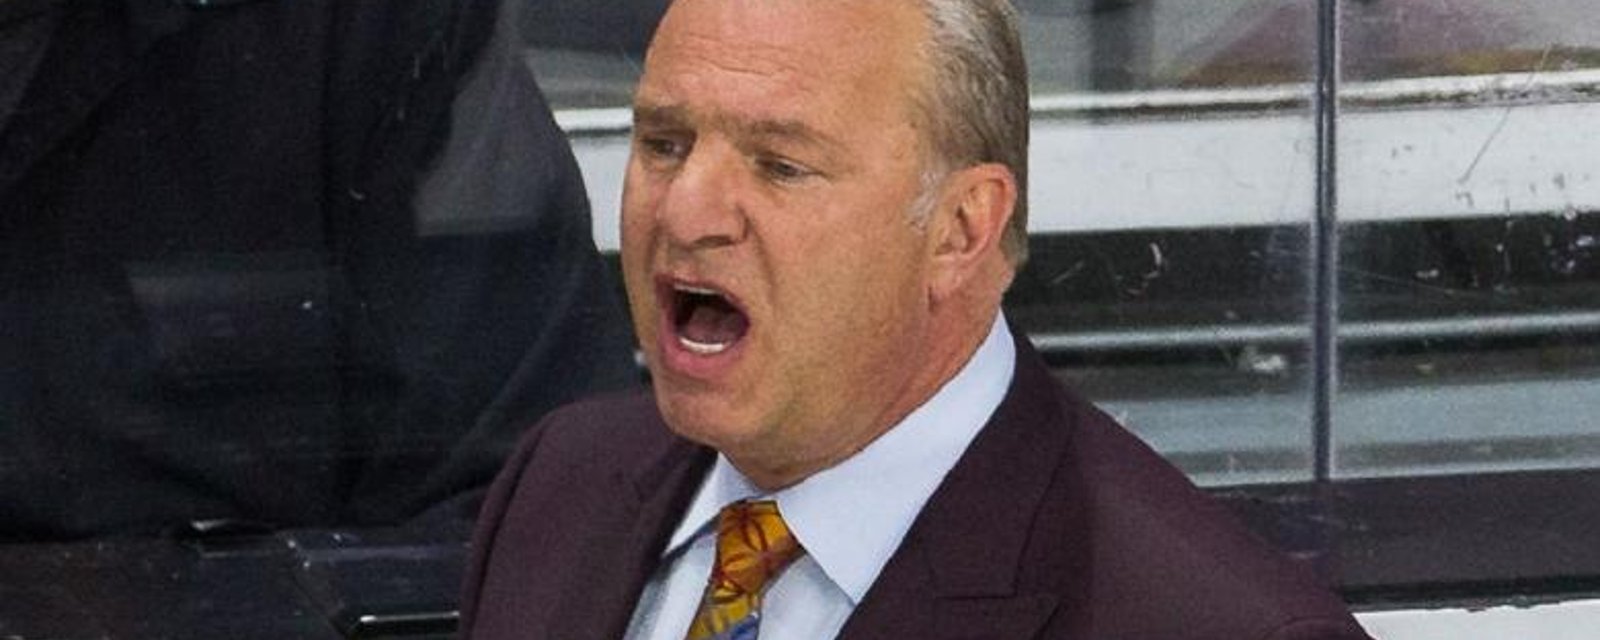 Habs head coach Michel Therrien may have been caught smiling behind the bench.